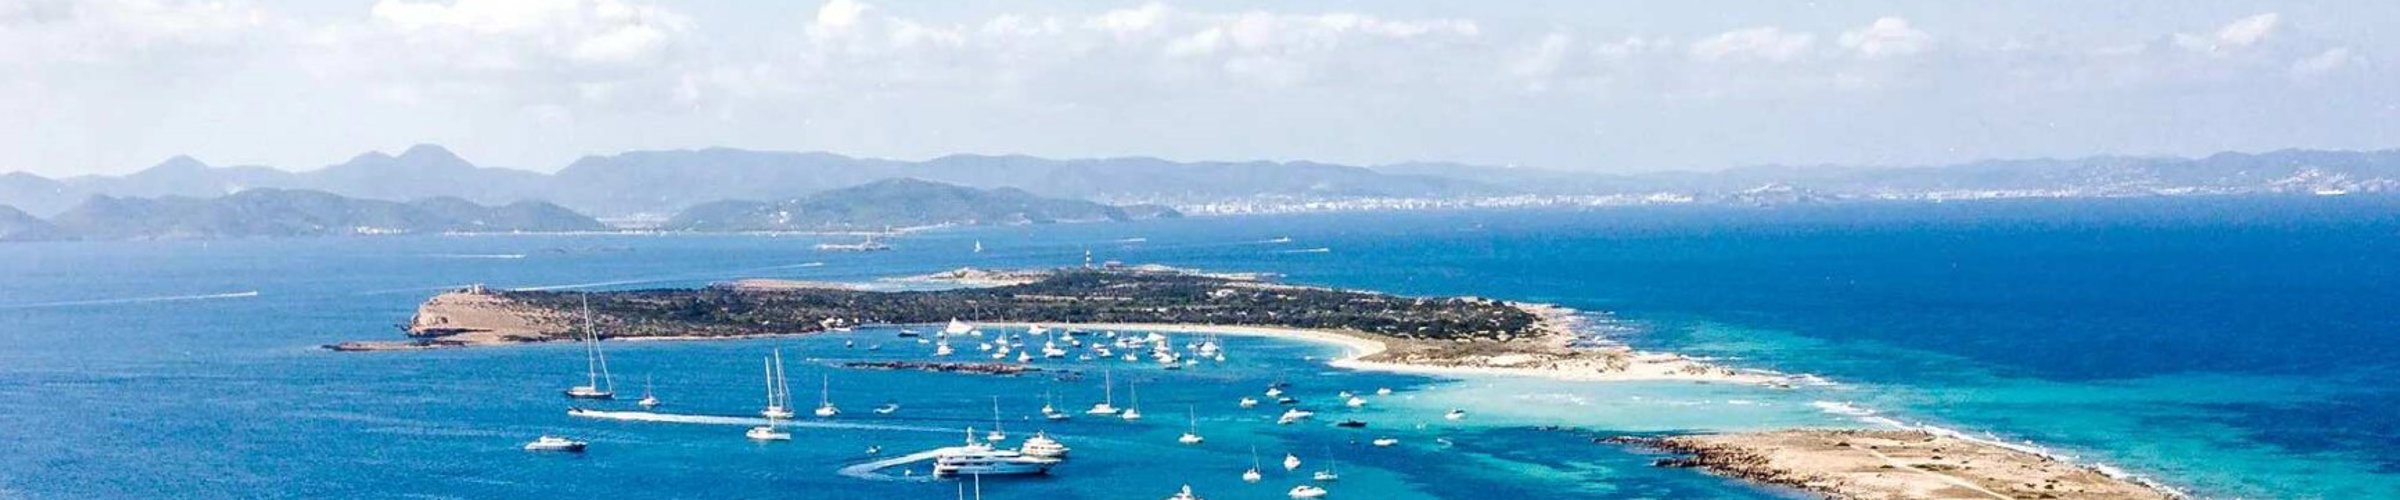 Ibiza by Boat: The Best Restaurants on Formentera